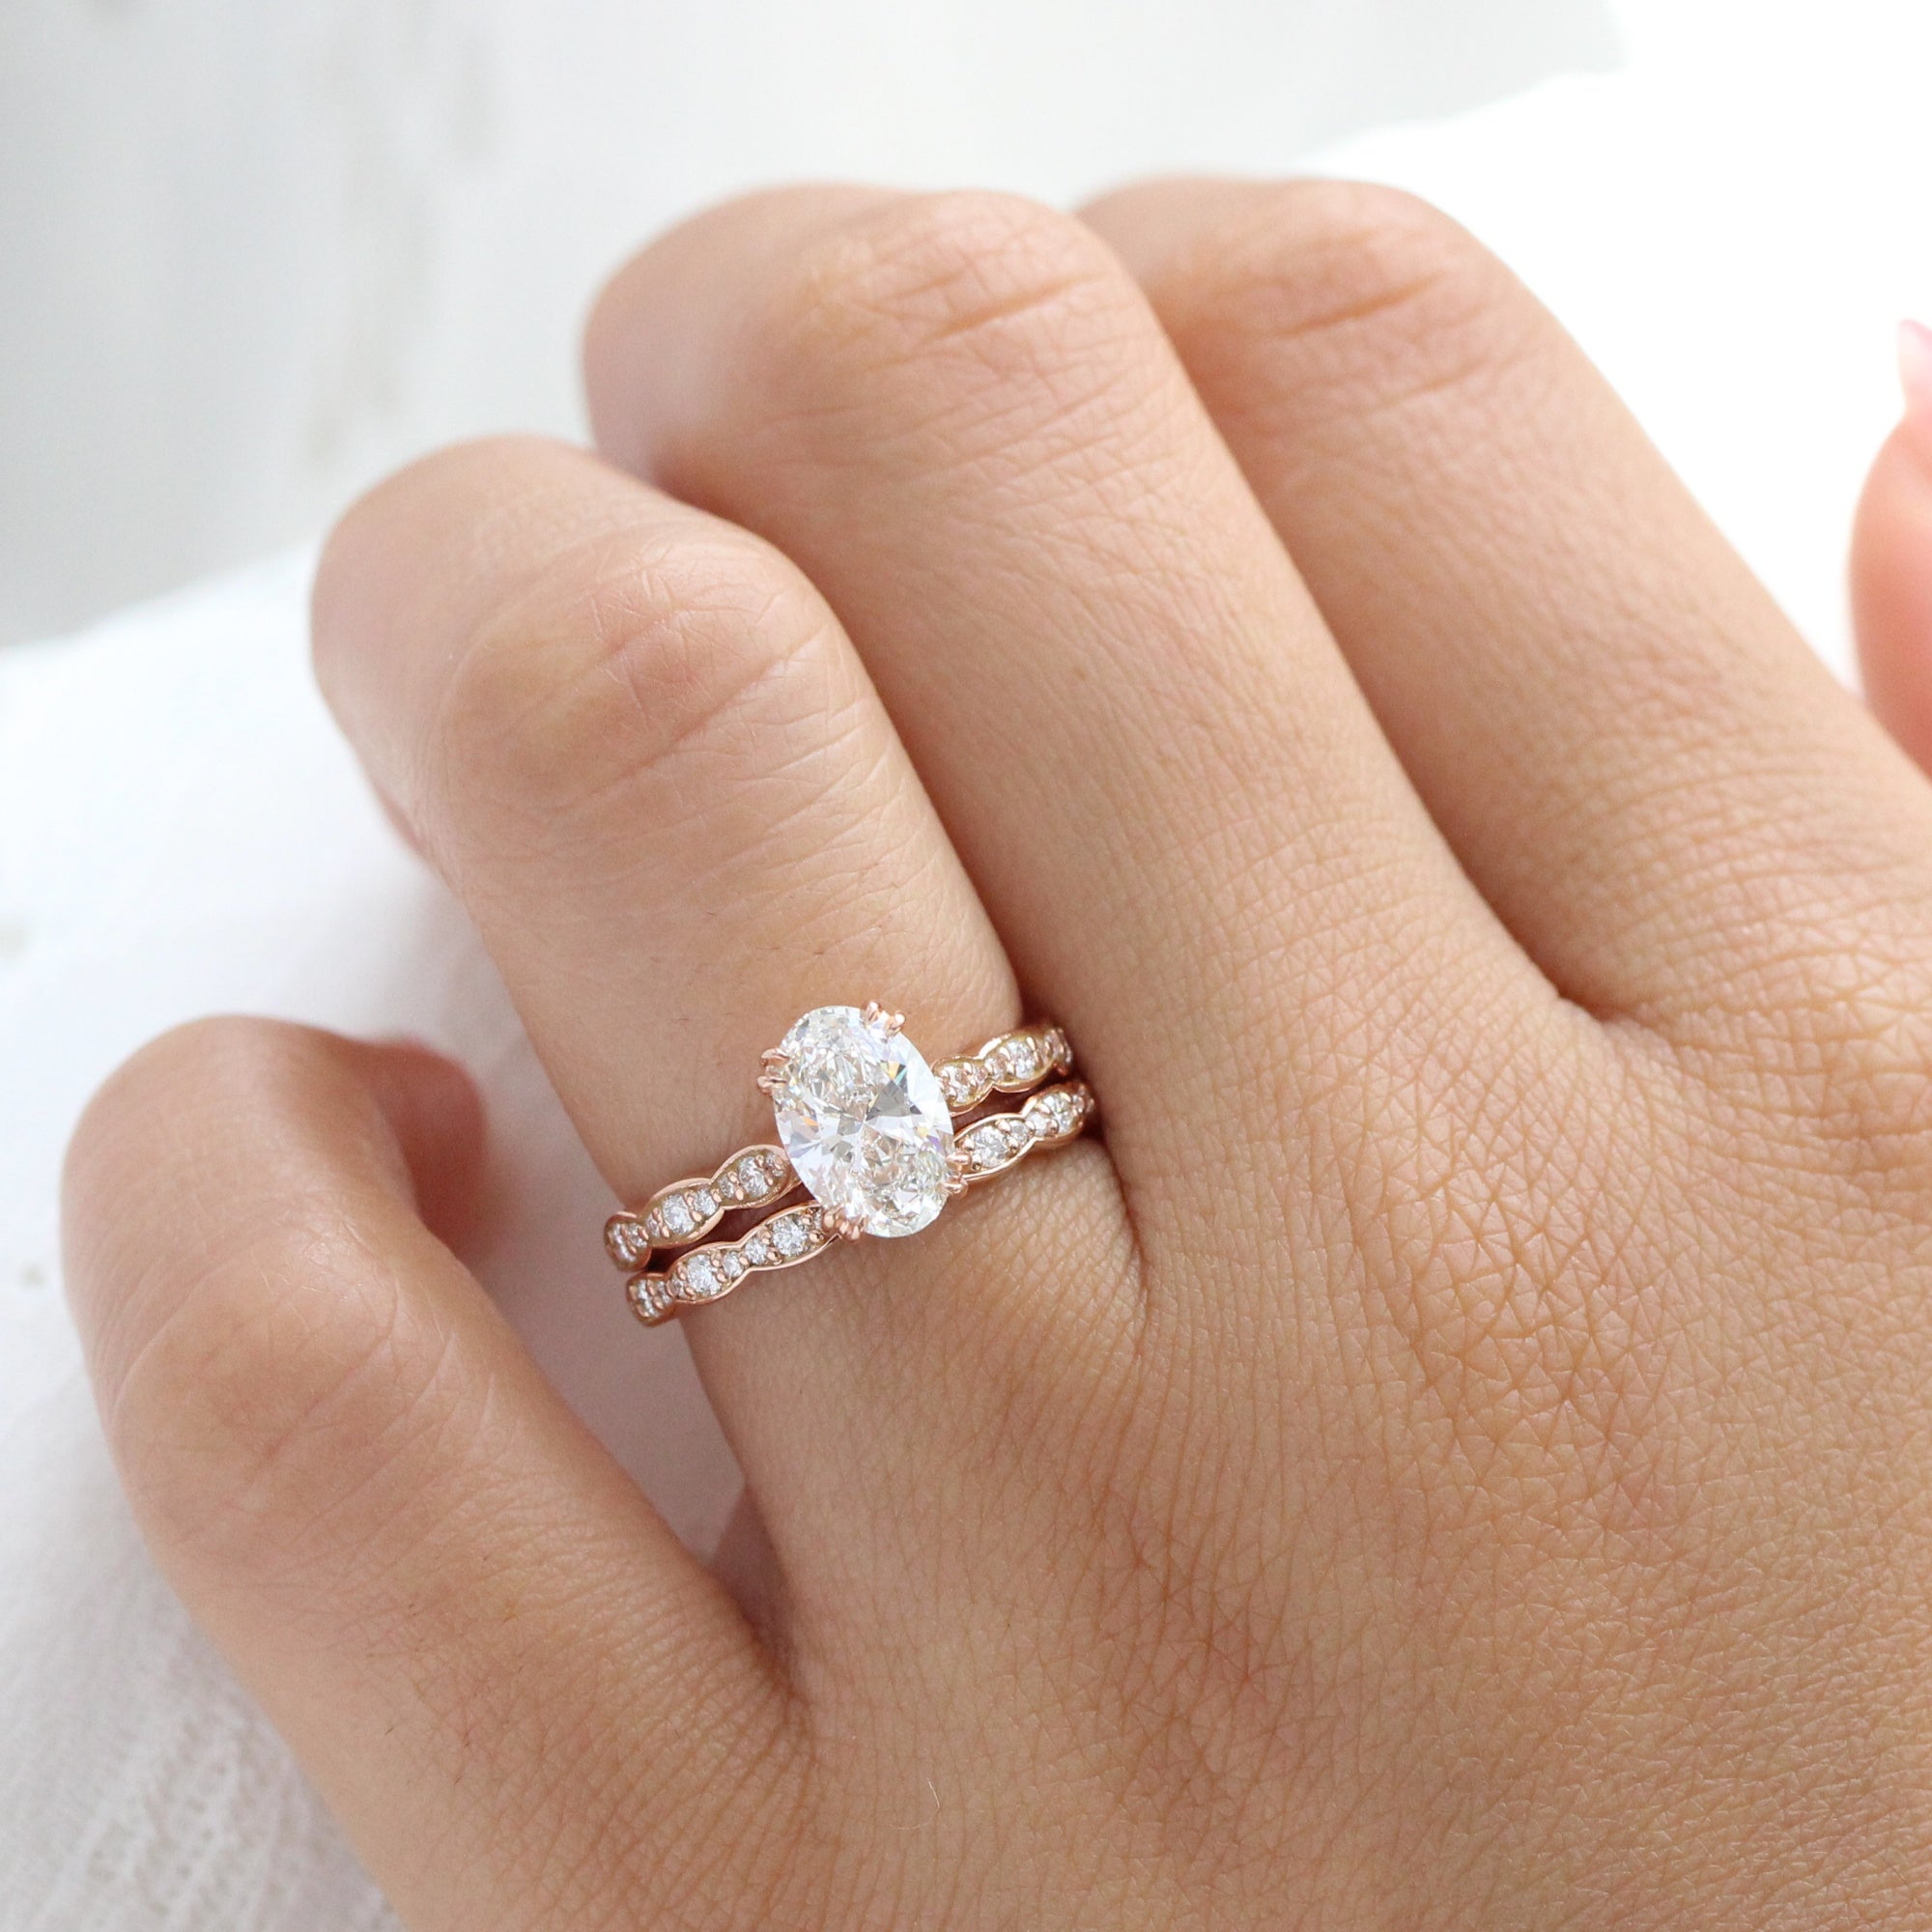 lab diamond ring bridal set rose gold oval diamond solitaire engagement ring La More Design Jewelry